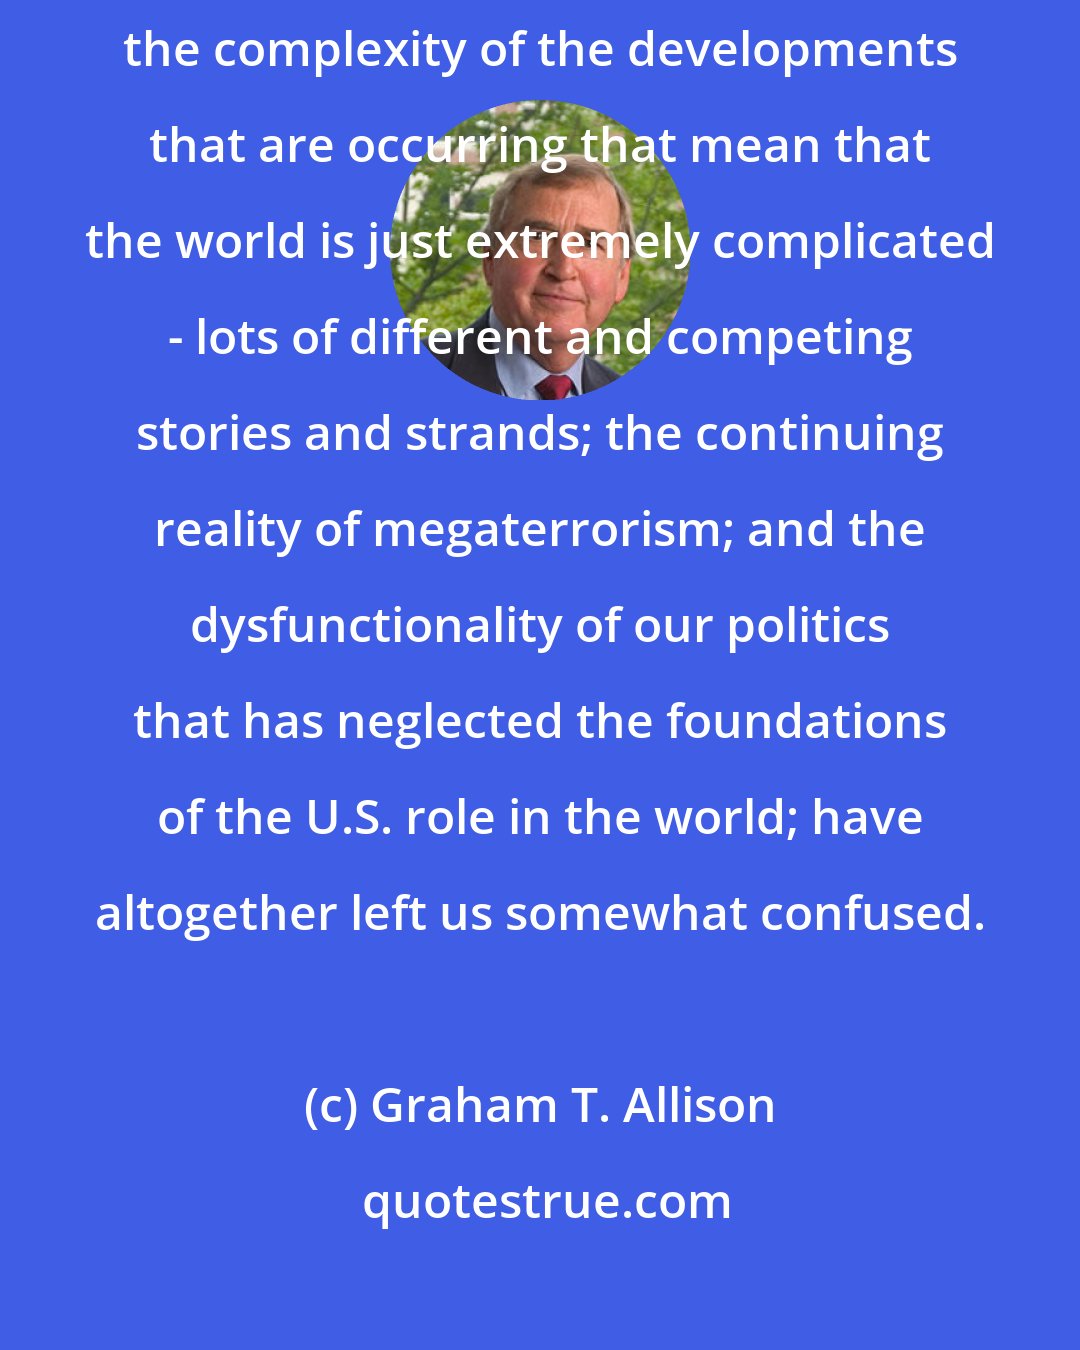 Graham T. Allison: The absence of a focal enemy, which is what the Cold War had provided; the complexity of the developments that are occurring that mean that the world is just extremely complicated - lots of different and competing stories and strands; the continuing reality of megaterrorism; and the dysfunctionality of our politics that has neglected the foundations of the U.S. role in the world; have altogether left us somewhat confused.